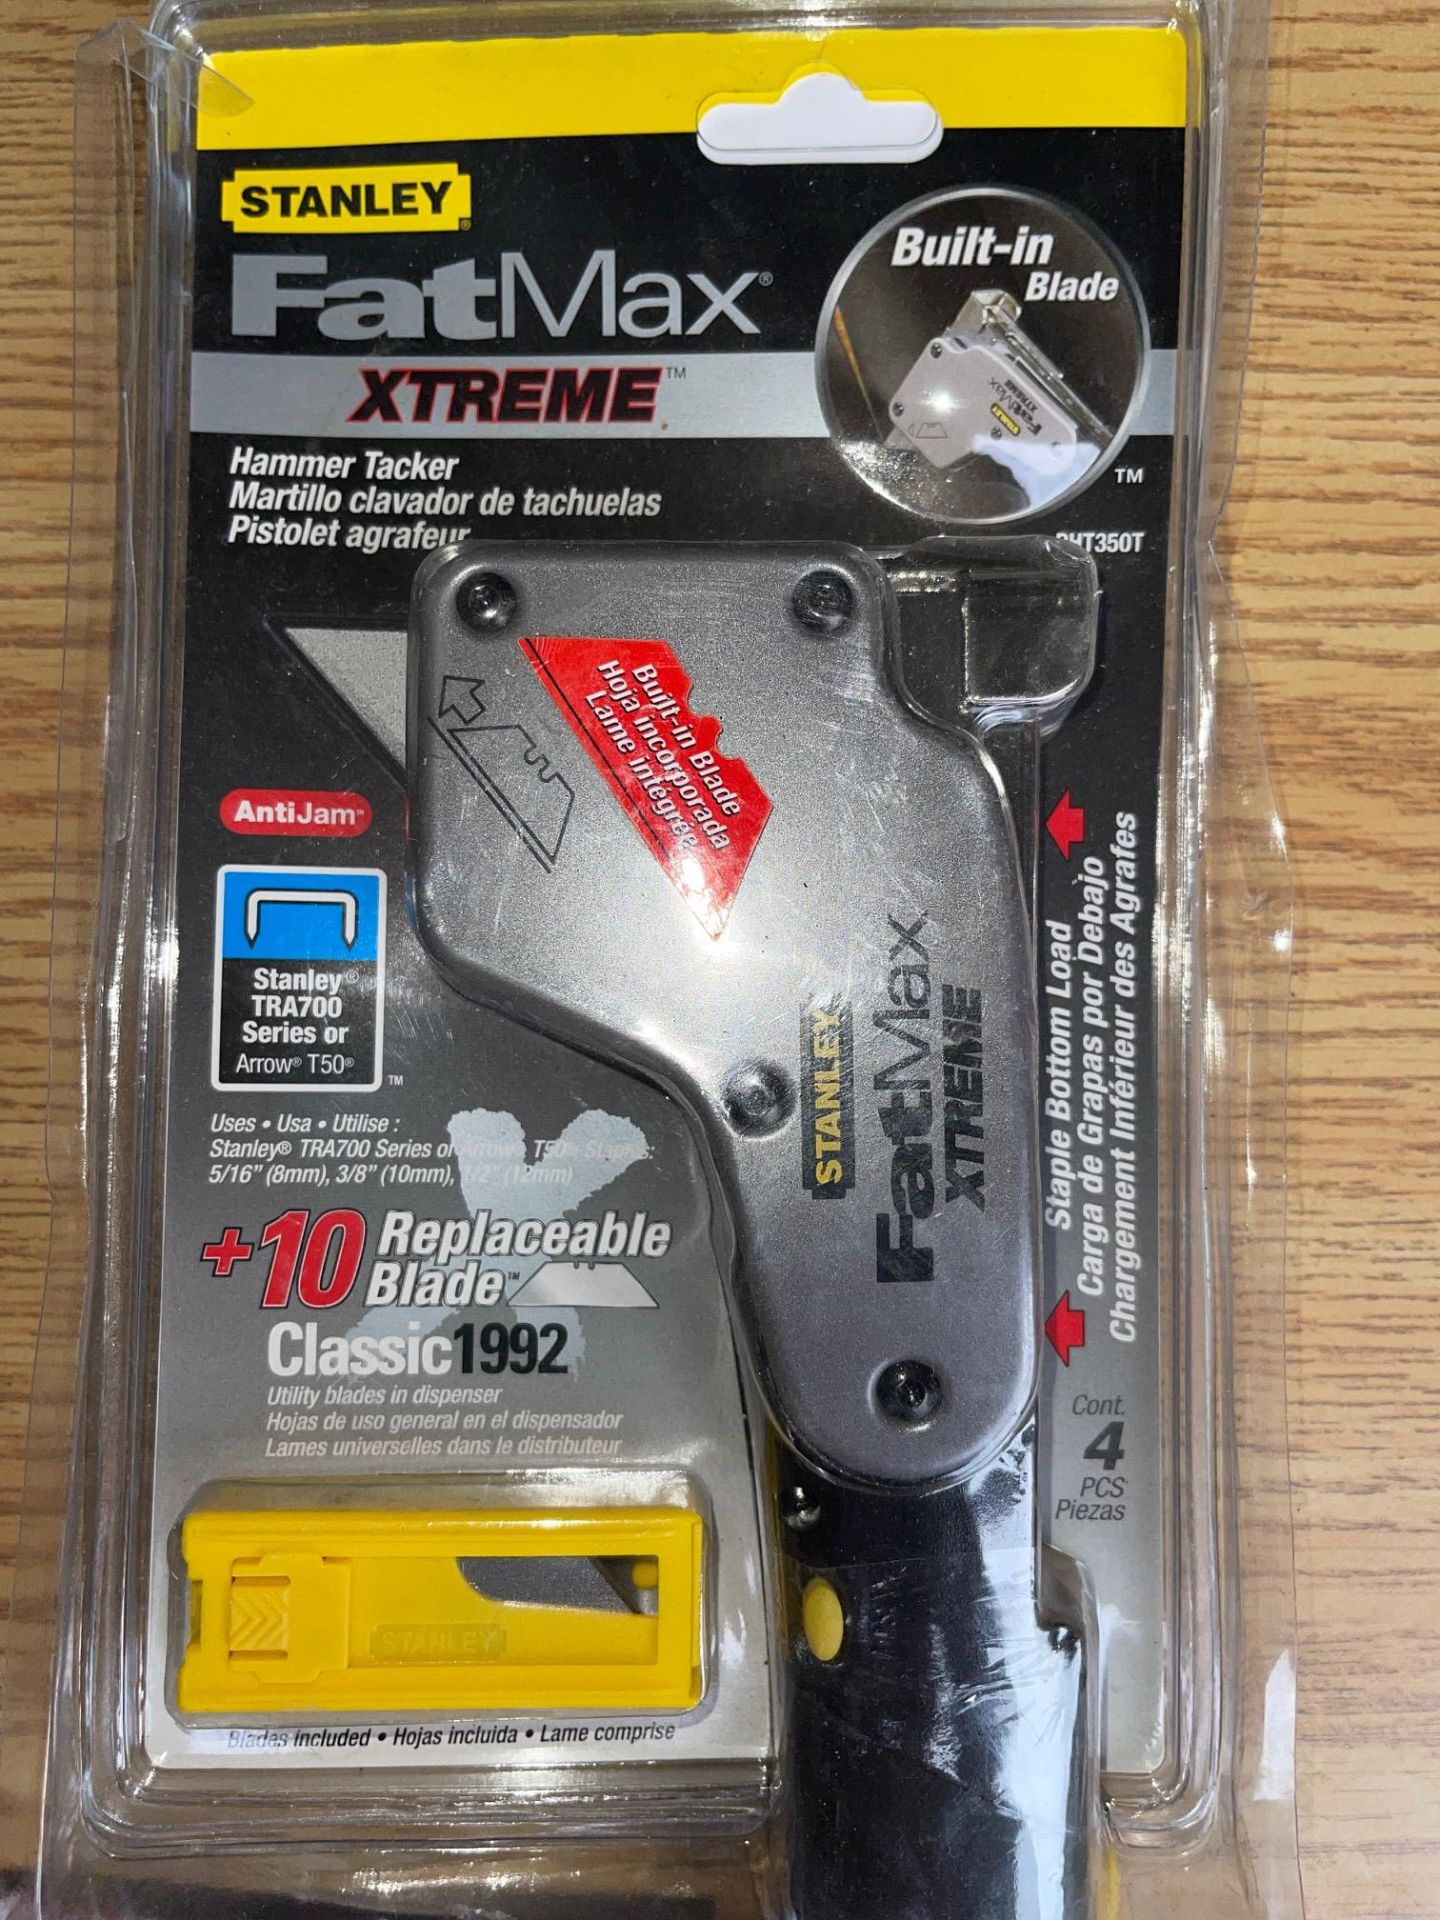 (STANLEY FATMAX XTREME)HAMMER TACKER, +10 REPLACEABLE BLADE